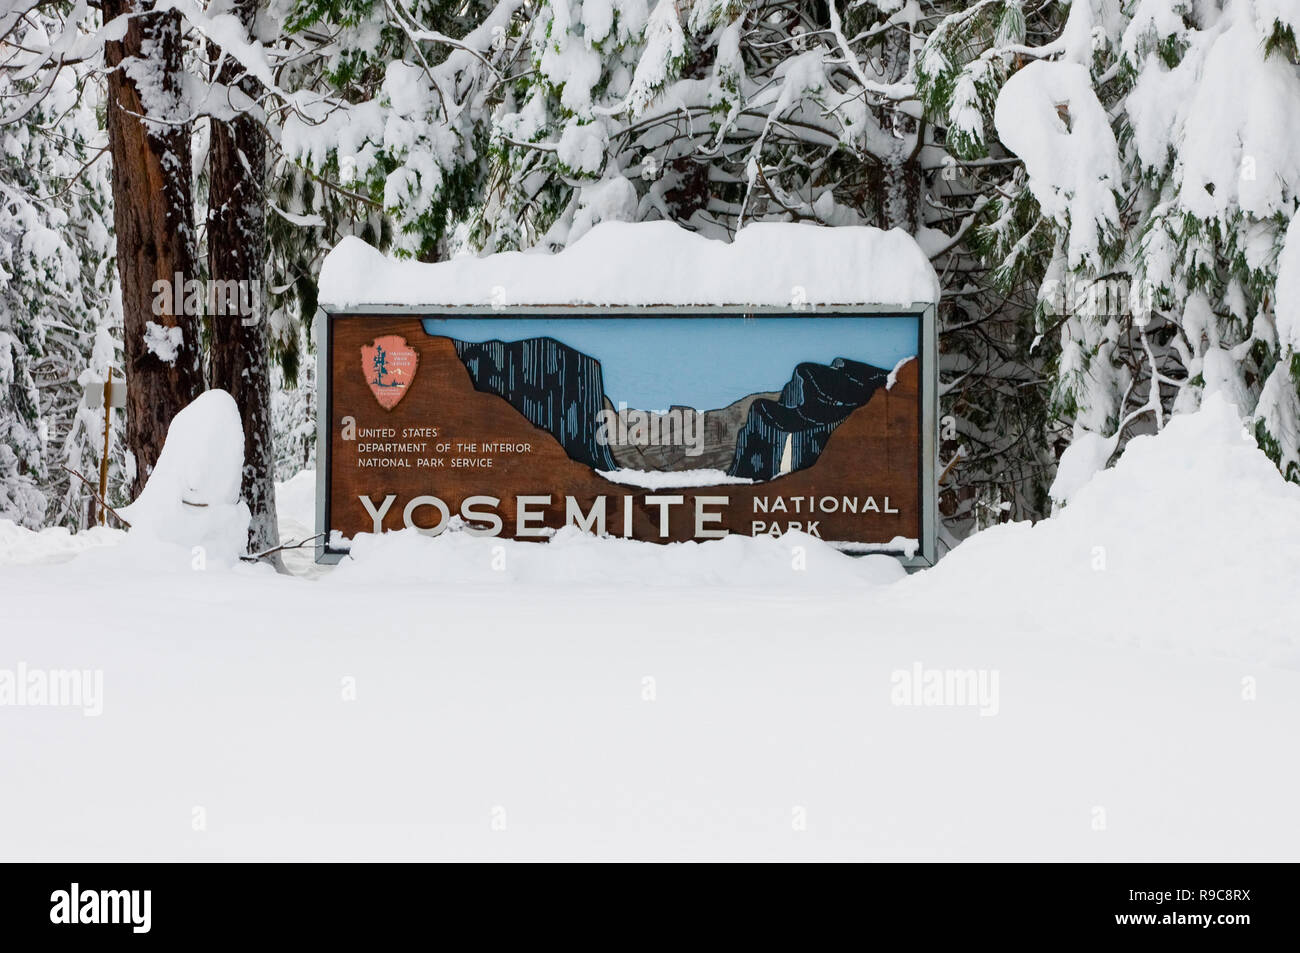 Yosemite entrance sign in winter with lots of snow Stock Photo